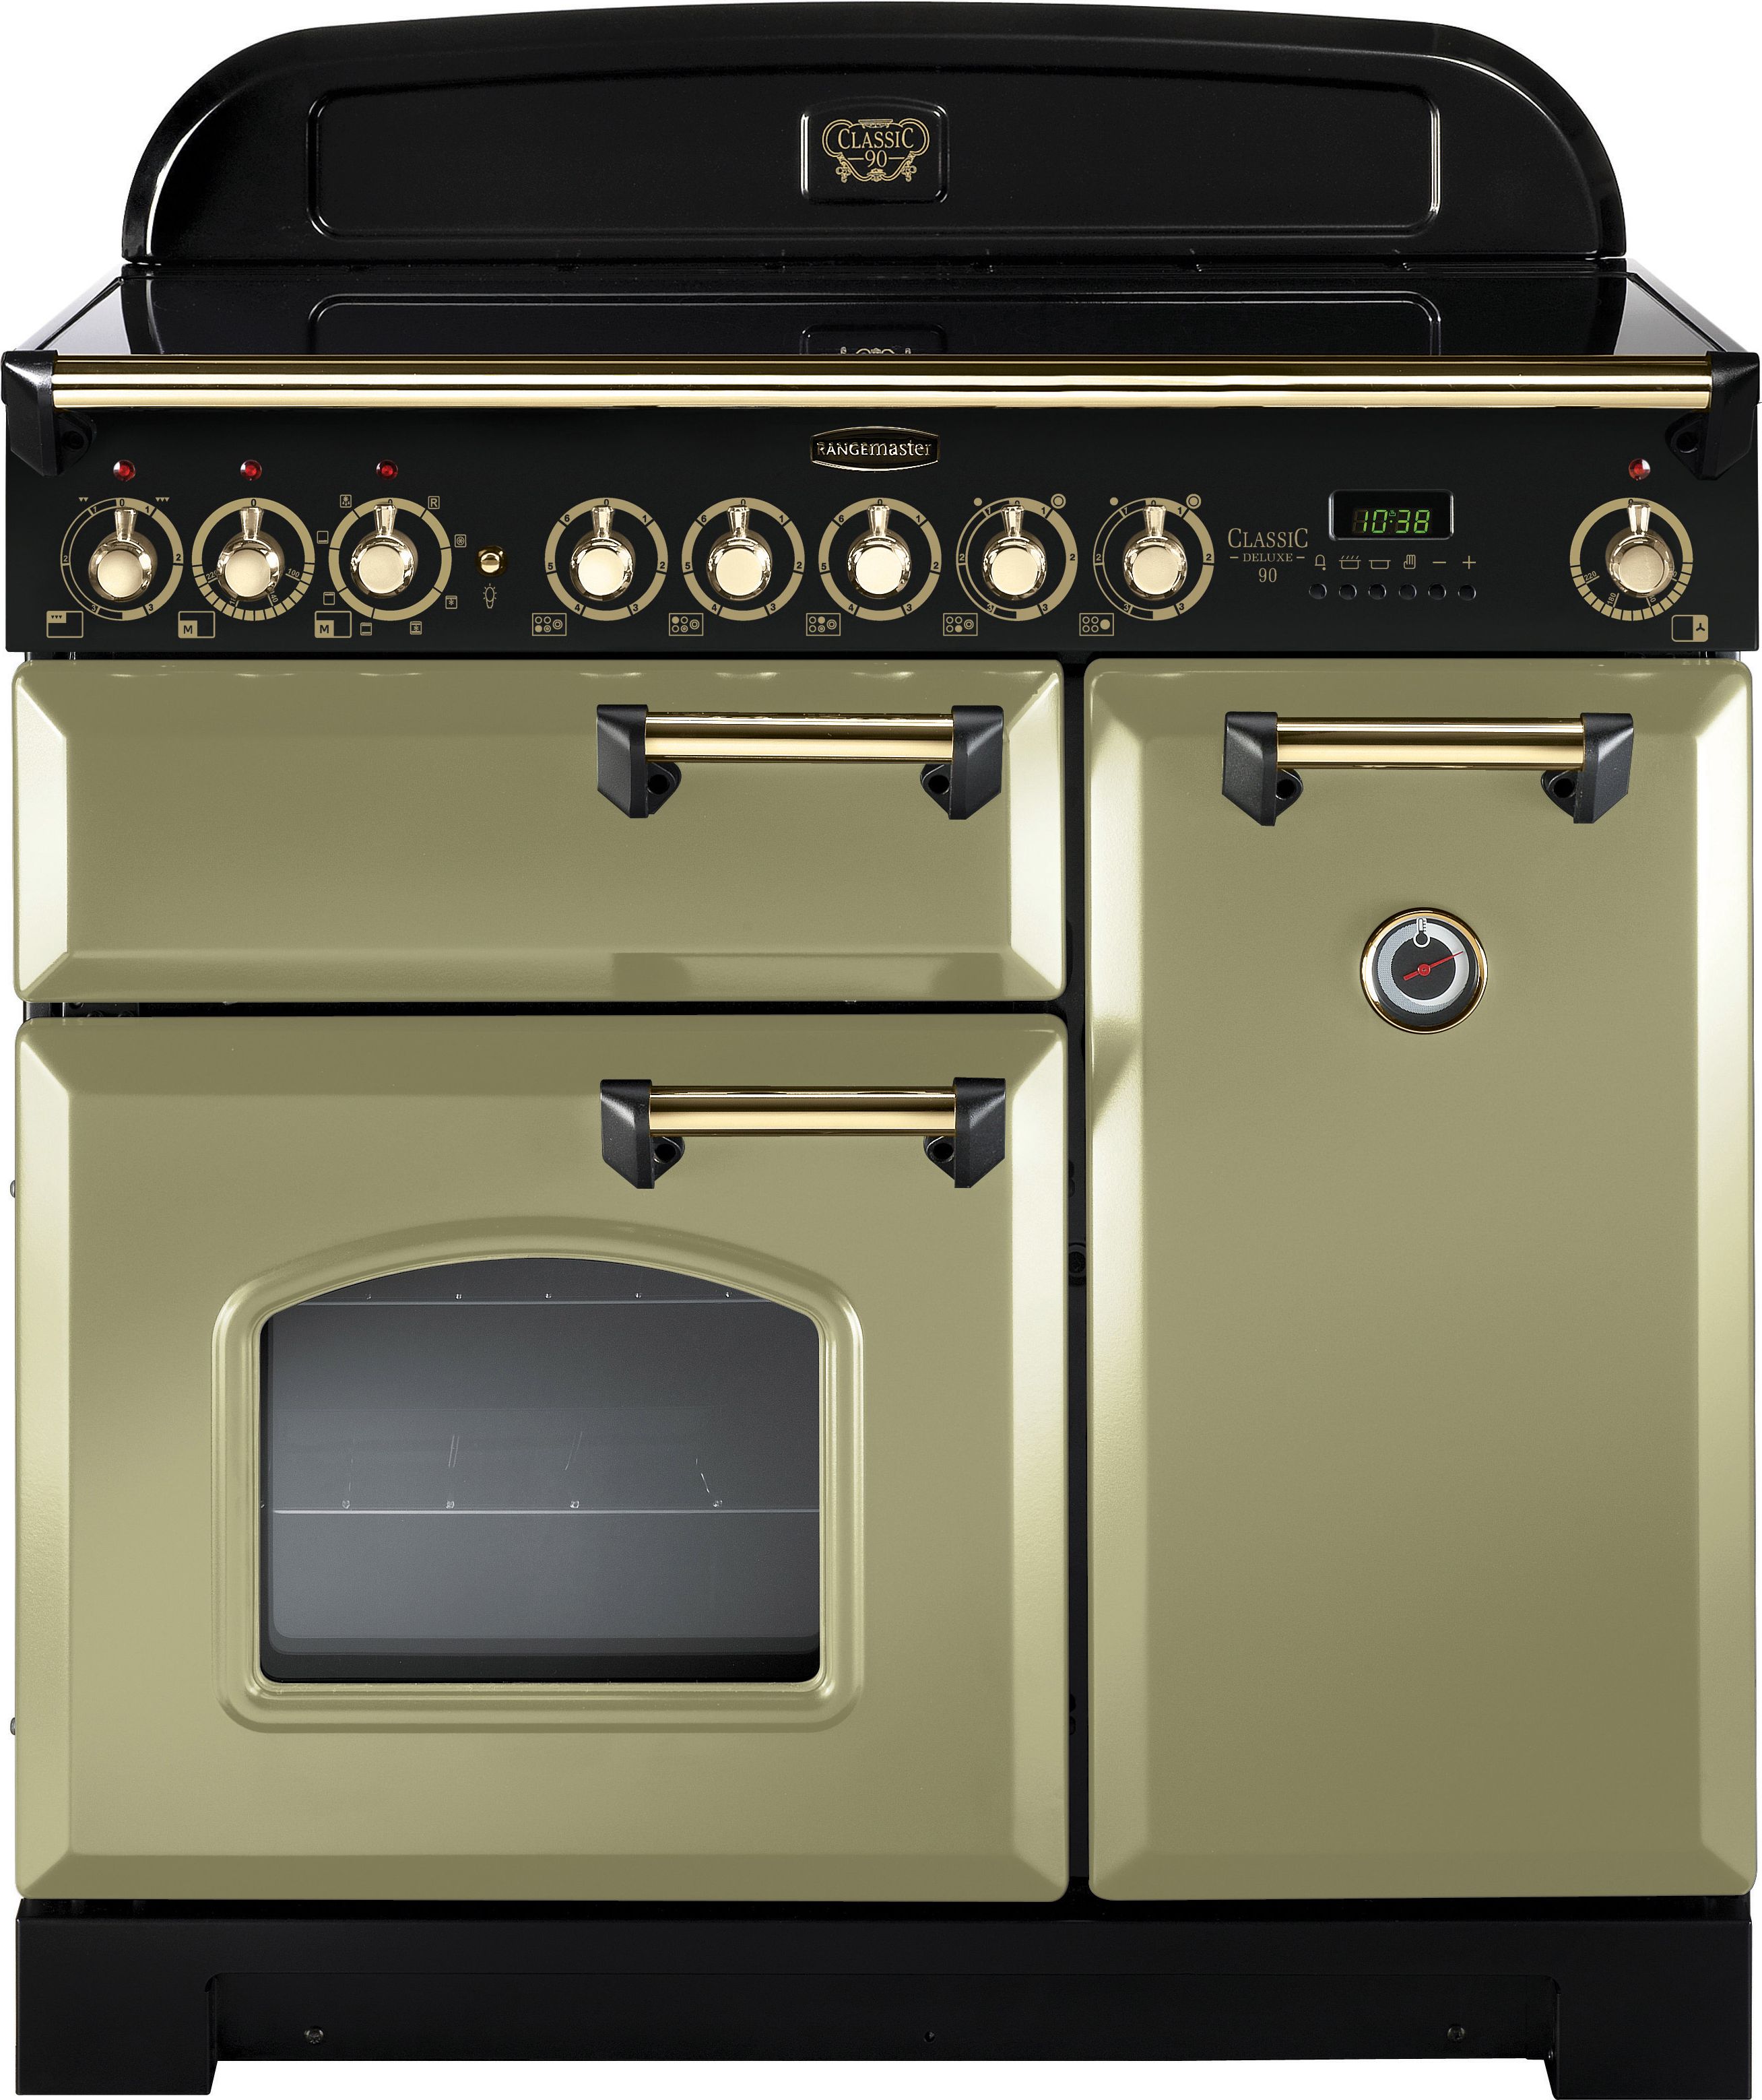 Rangemaster Classic Deluxe CDL90ECOG/B 90cm Electric Range Cooker with Ceramic Hob - Olive Green / Brass - A/A Rated, Green